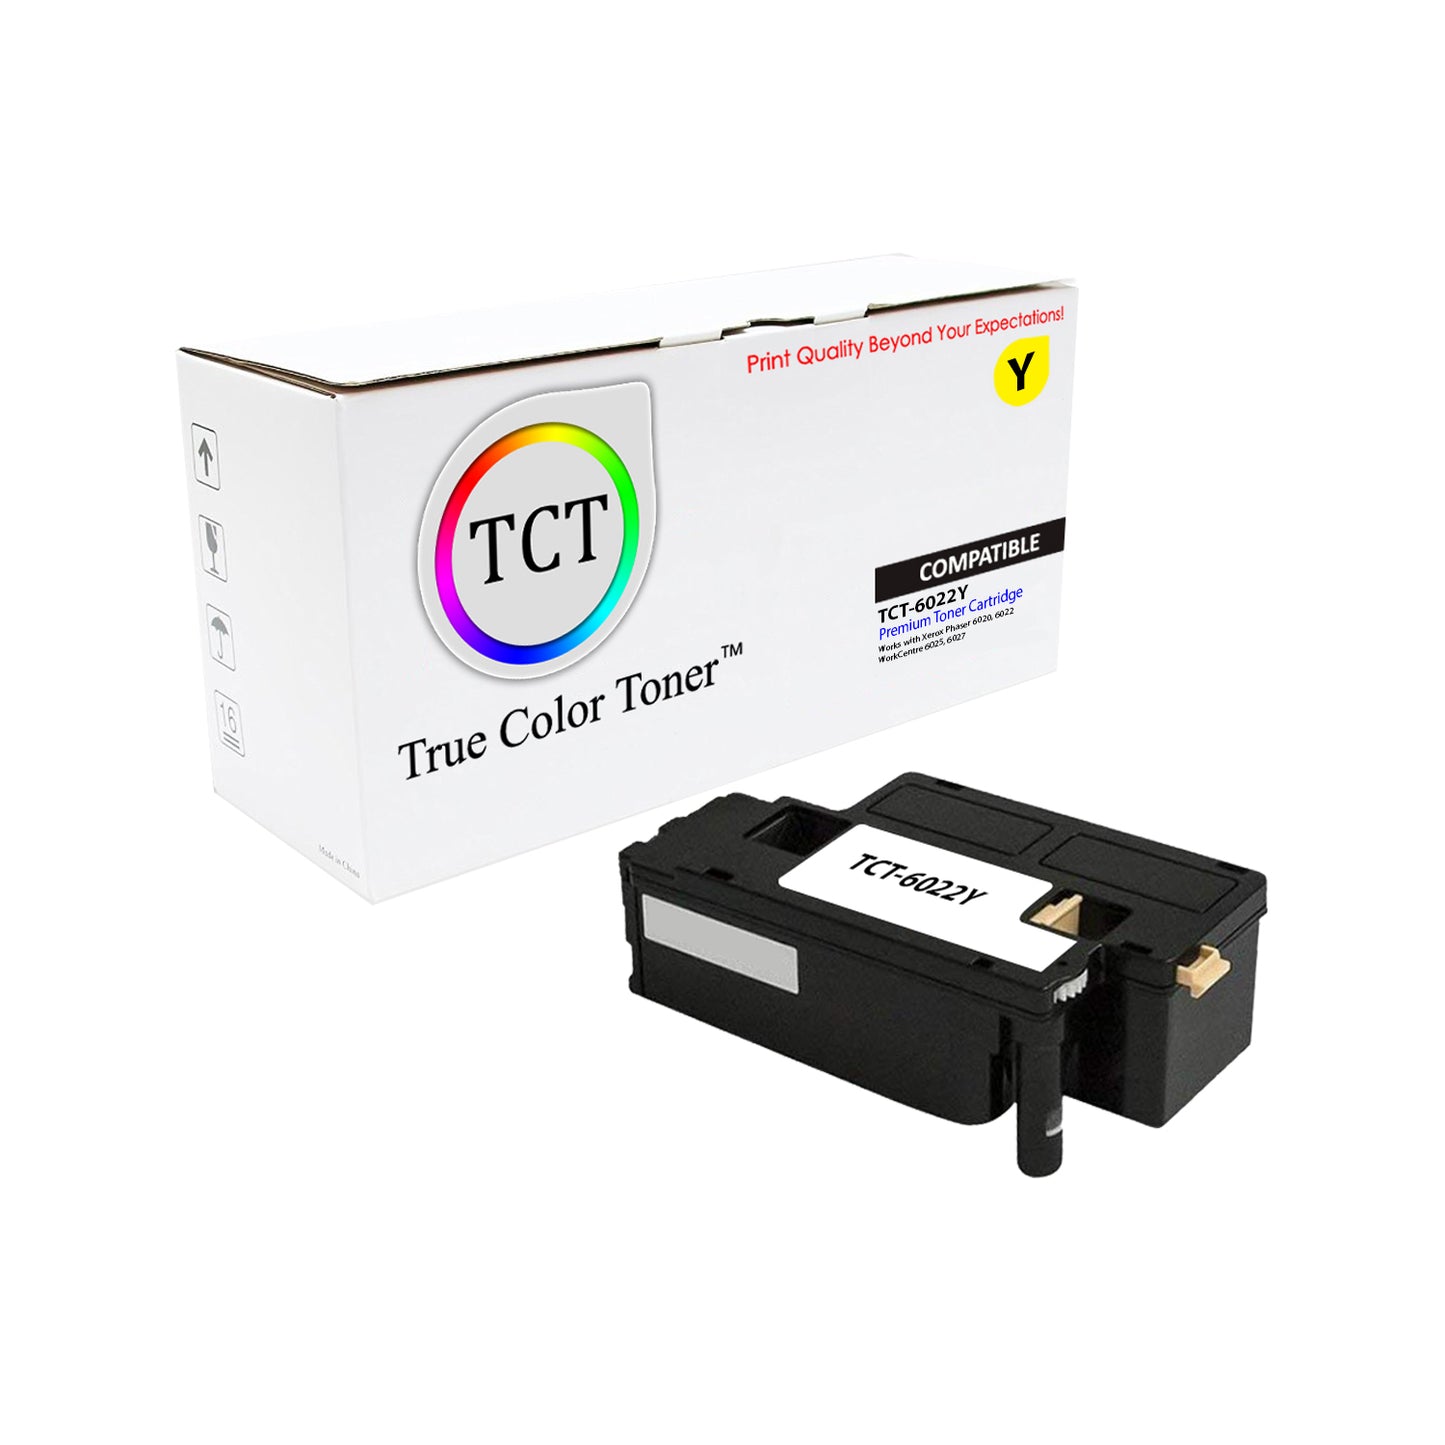 TCT Compatible Toner Cartridge Replacement for the Xerox 6022 Series - 1 Pack Yellow